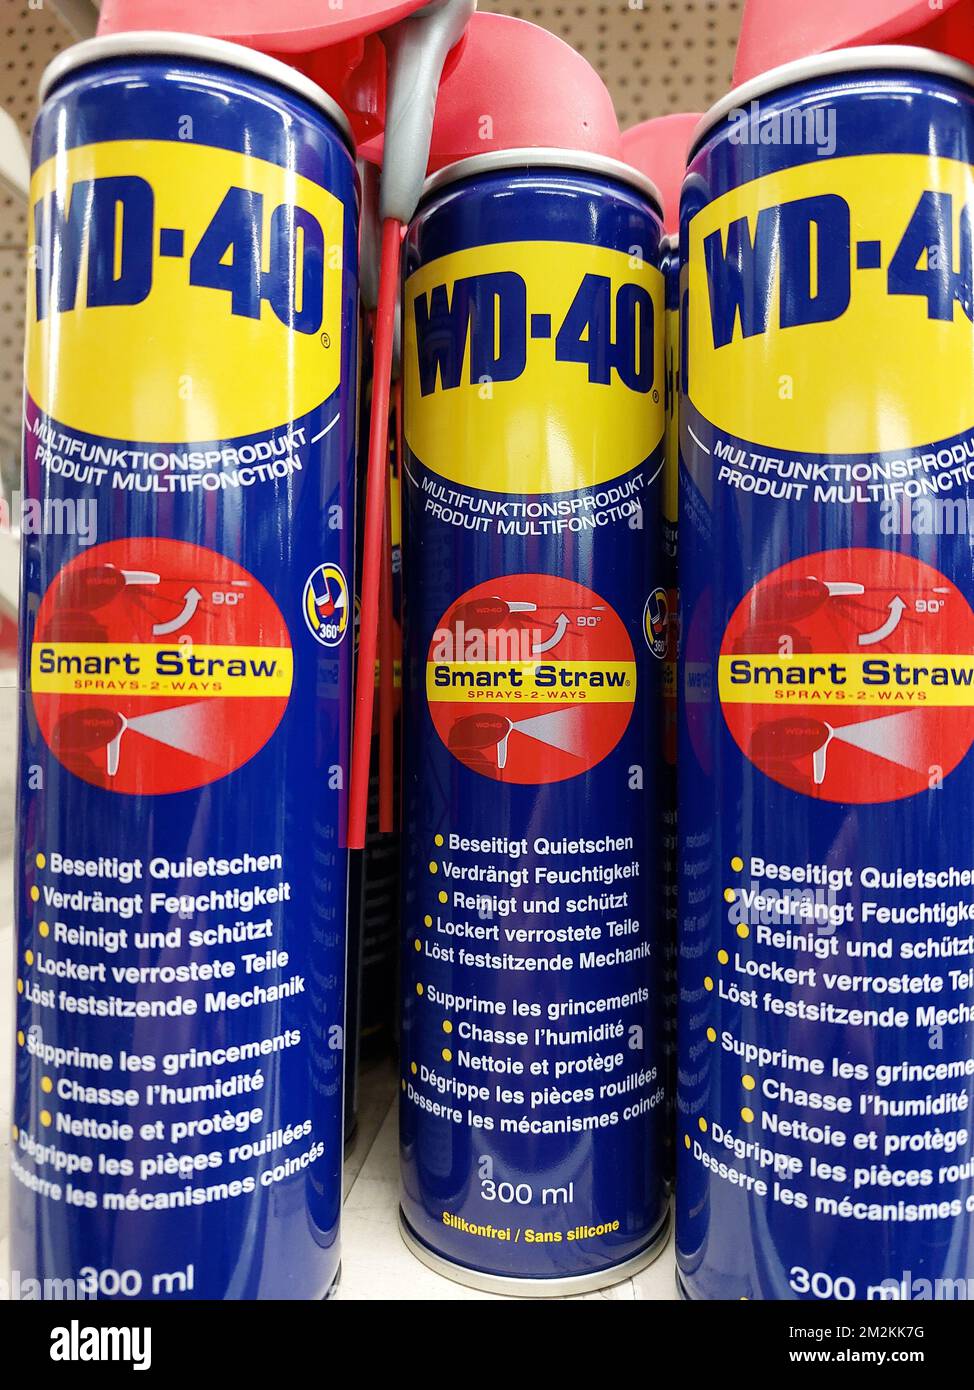 WD-40 oil spray cans Stock Photo